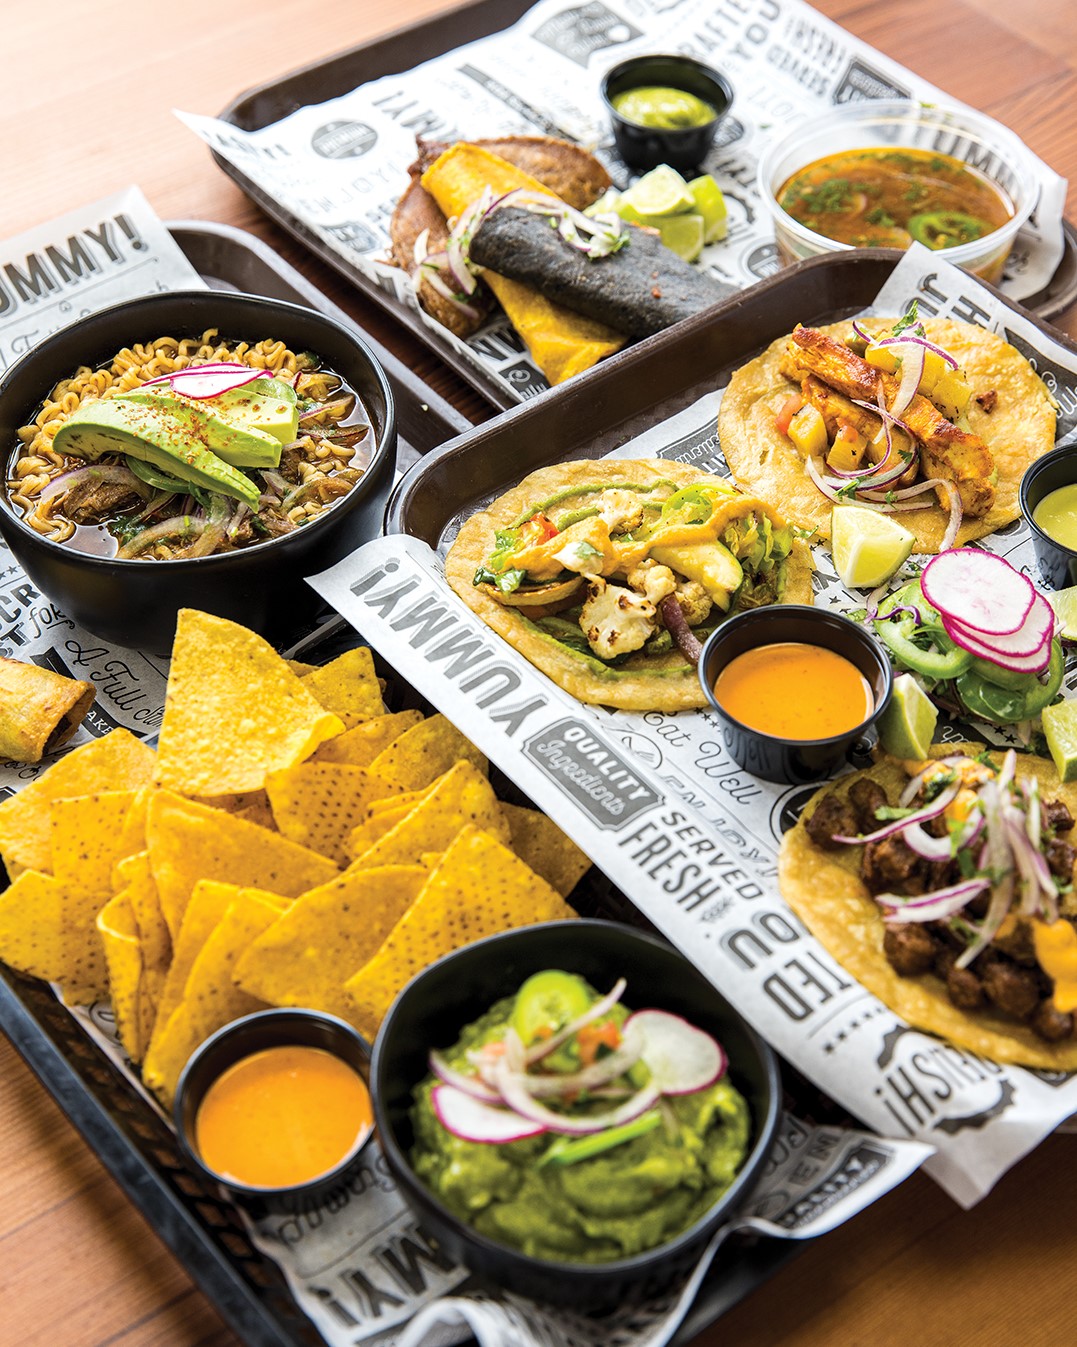 The Birria Ramen (top left) and Quesabirria (top right) are two popular menu items. Customers also enjoy tacos (bottom right) and guacamole with chips (bottom left).